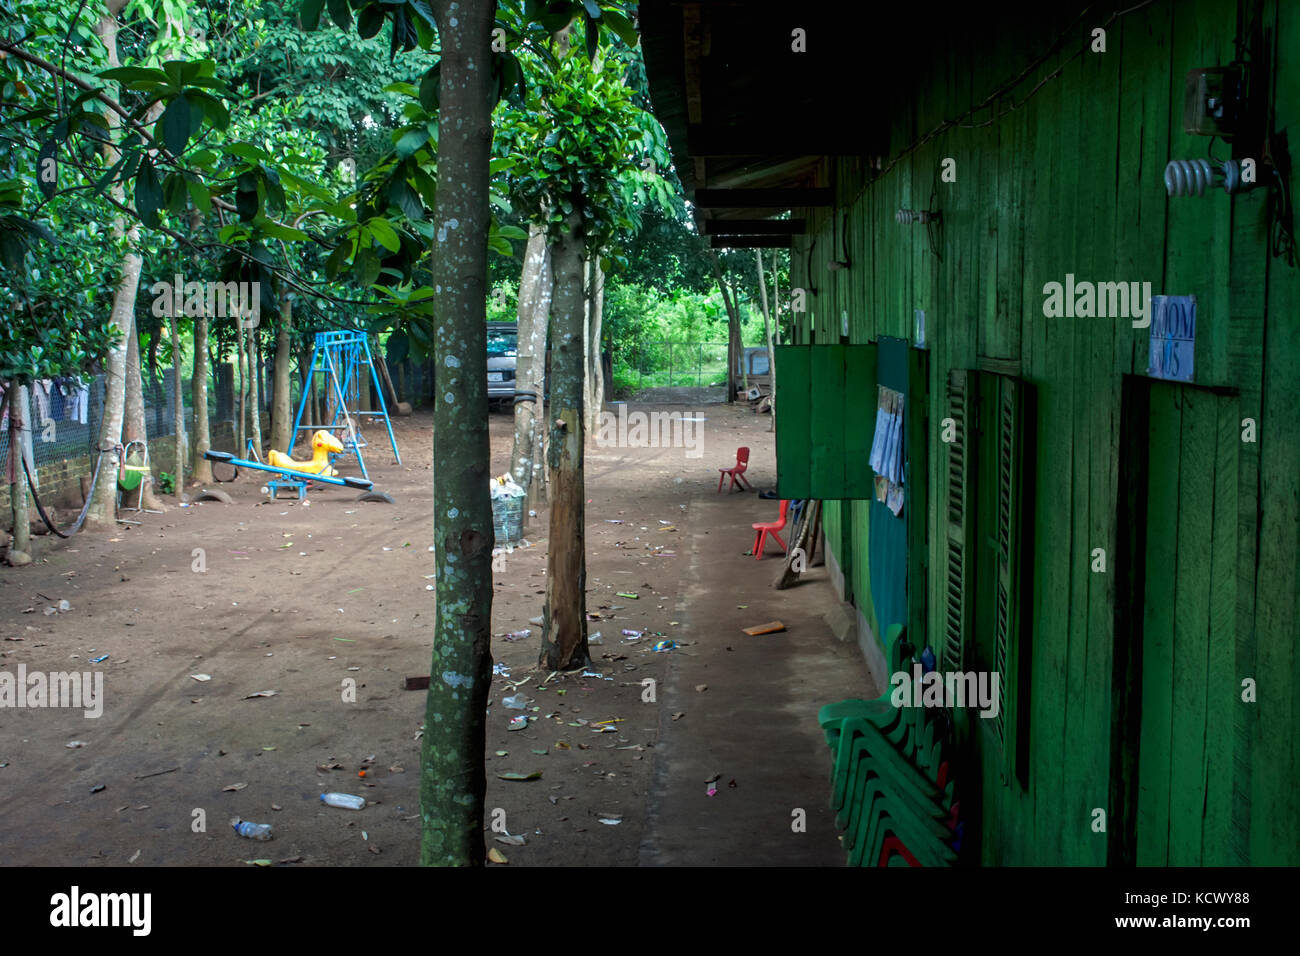 A dilapidated wooden school house serves English students in Tboung Khmum province, Cambodia. Stock Photo